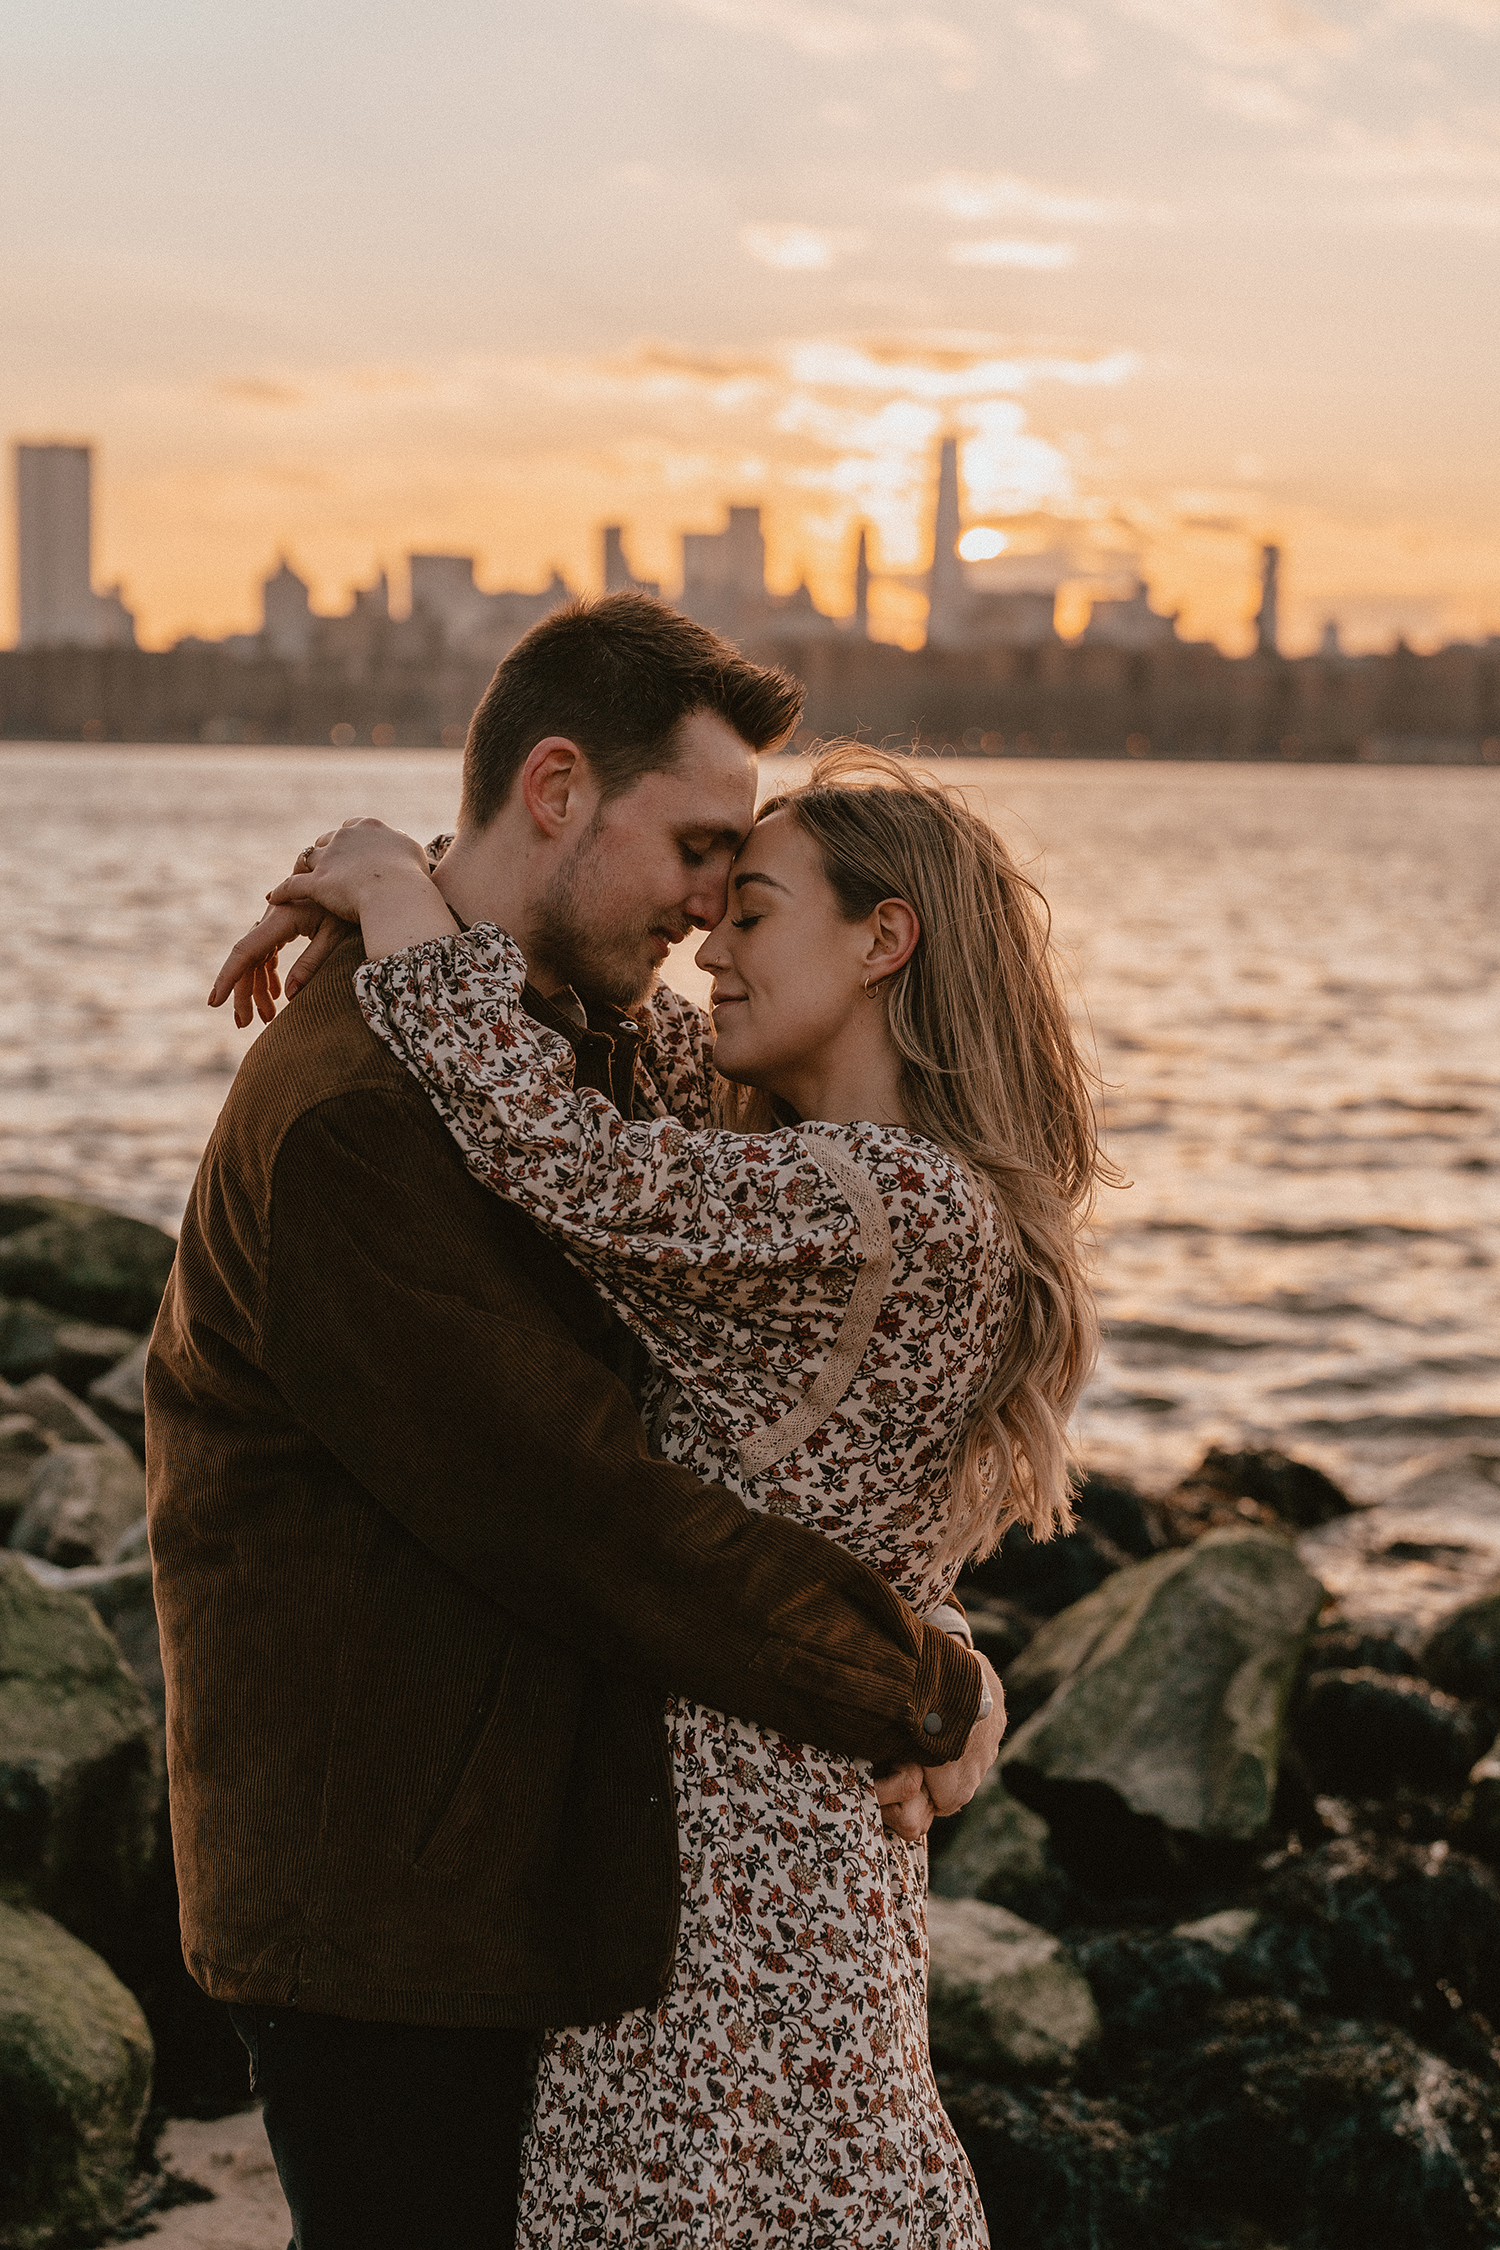 Engagement photos looking out over the NYC skyline during golden hour.